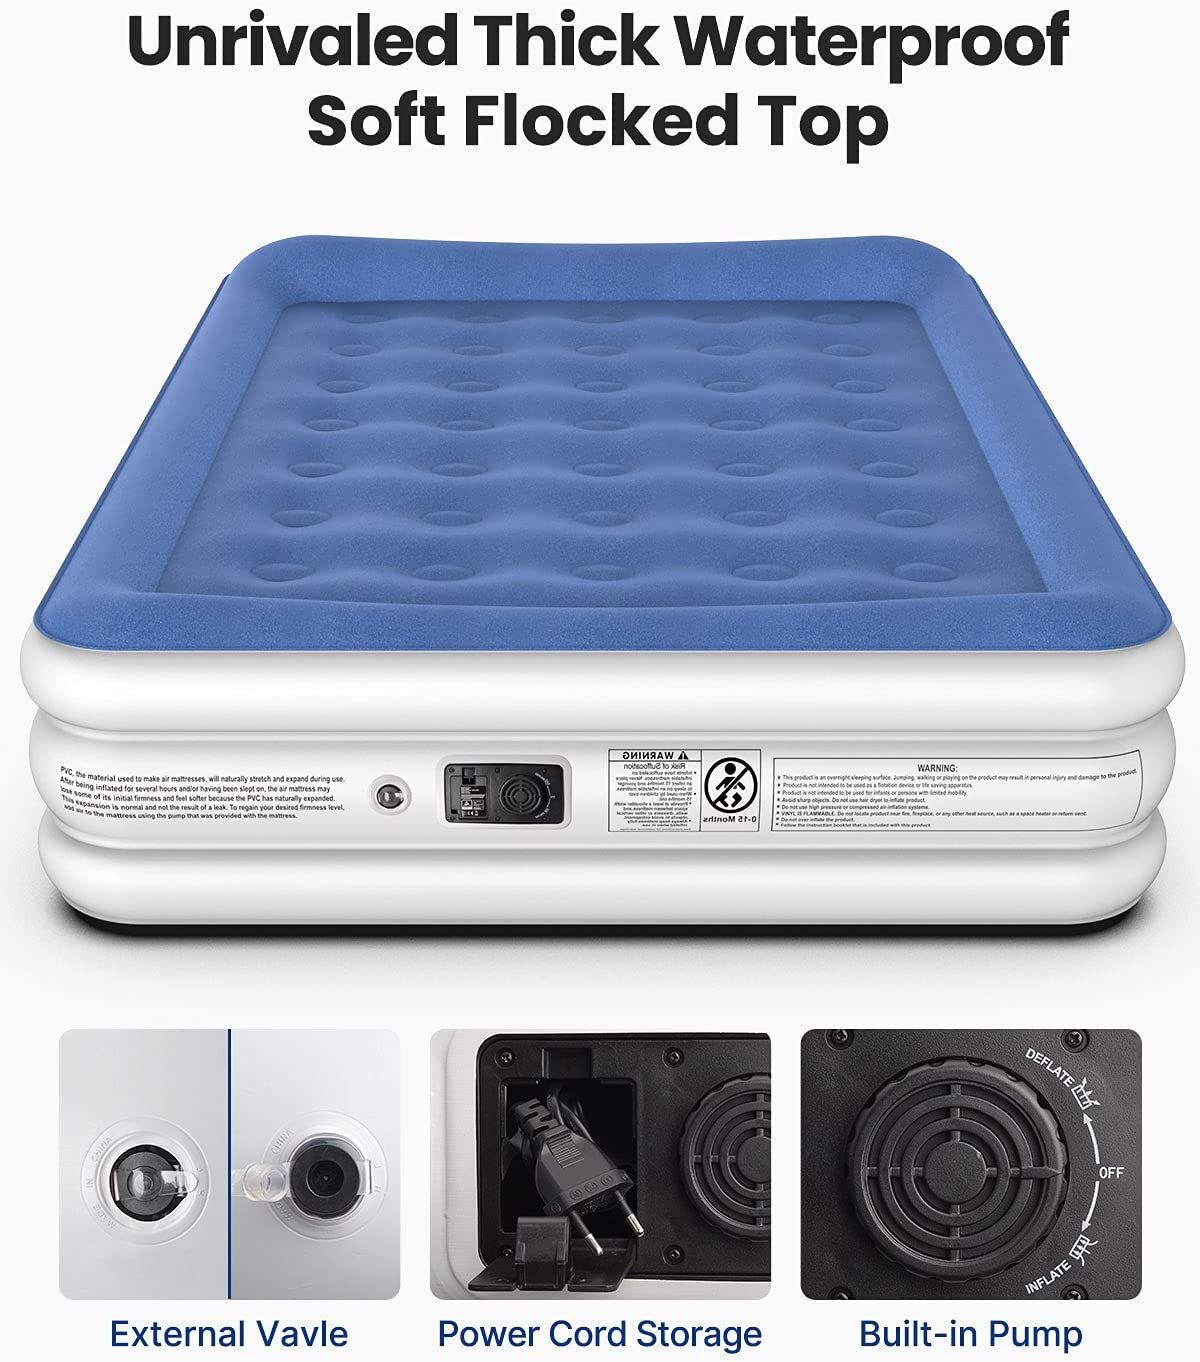 iDOO Inflatable Mattress with Integrated Pillow and Pump